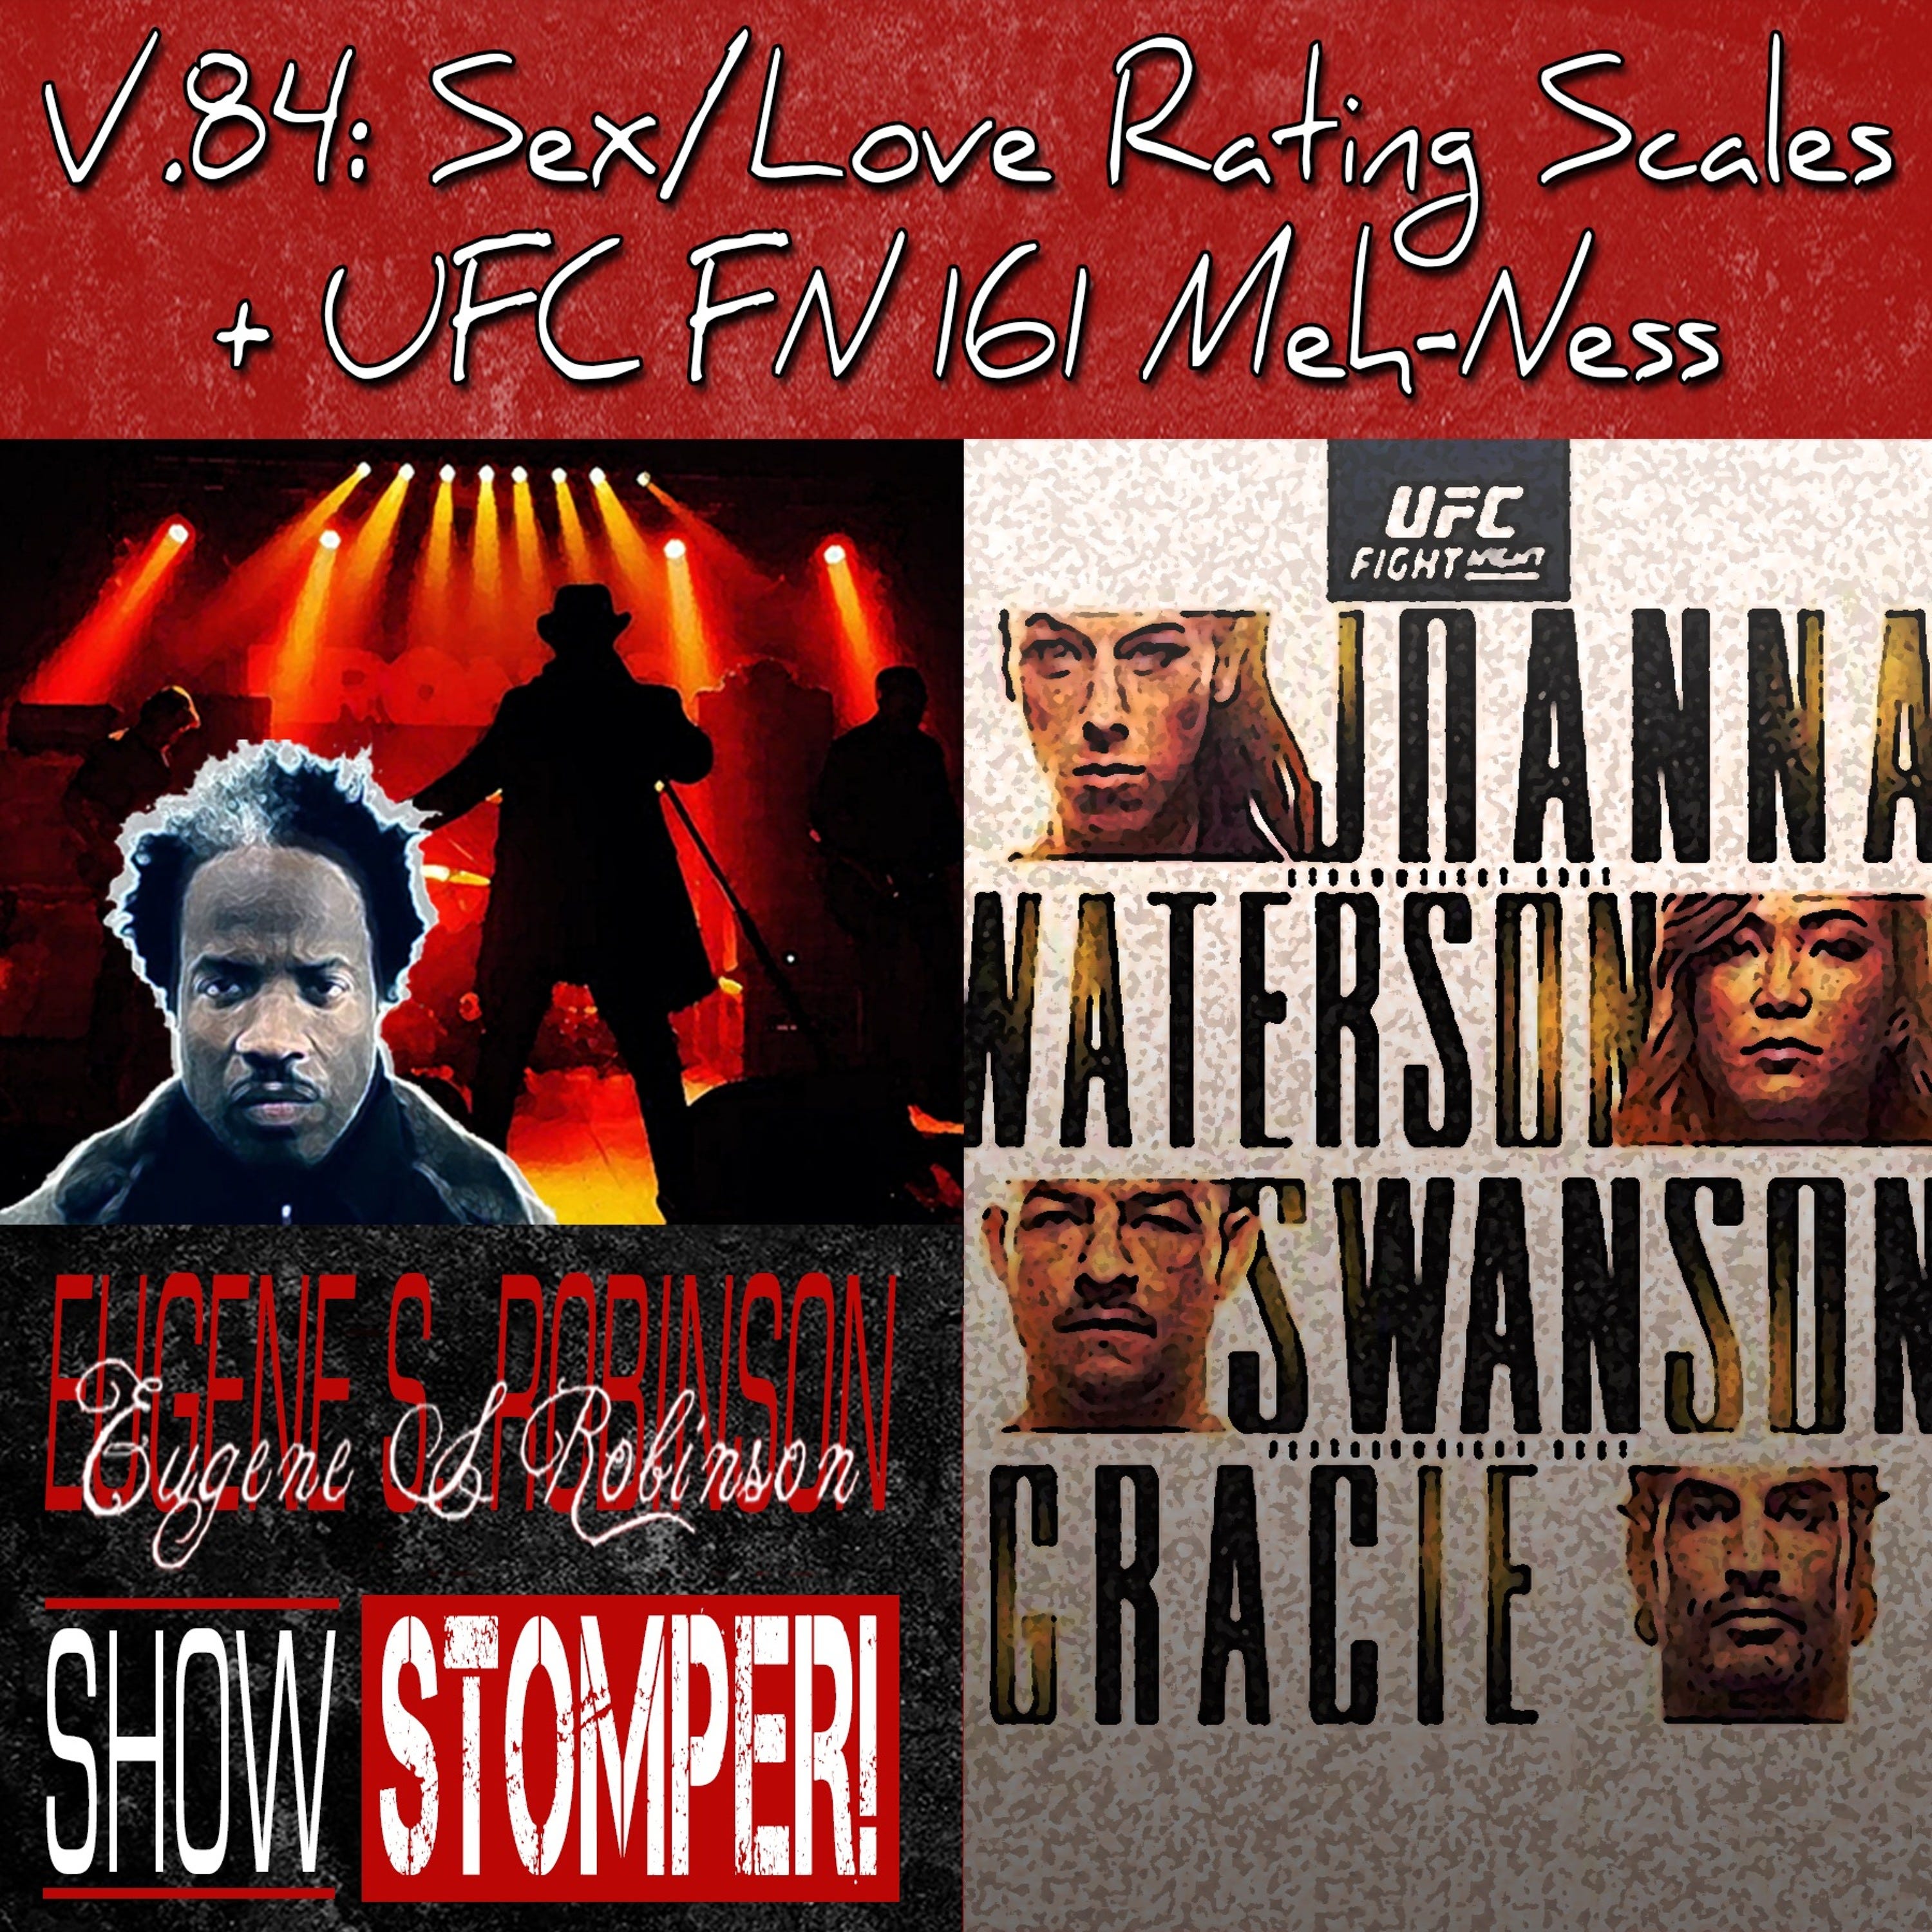 V.84 SexLove Rating Scales + UFC FN 161 Meh - Ness On The Eugene S. Robinson Show Stomper Show!